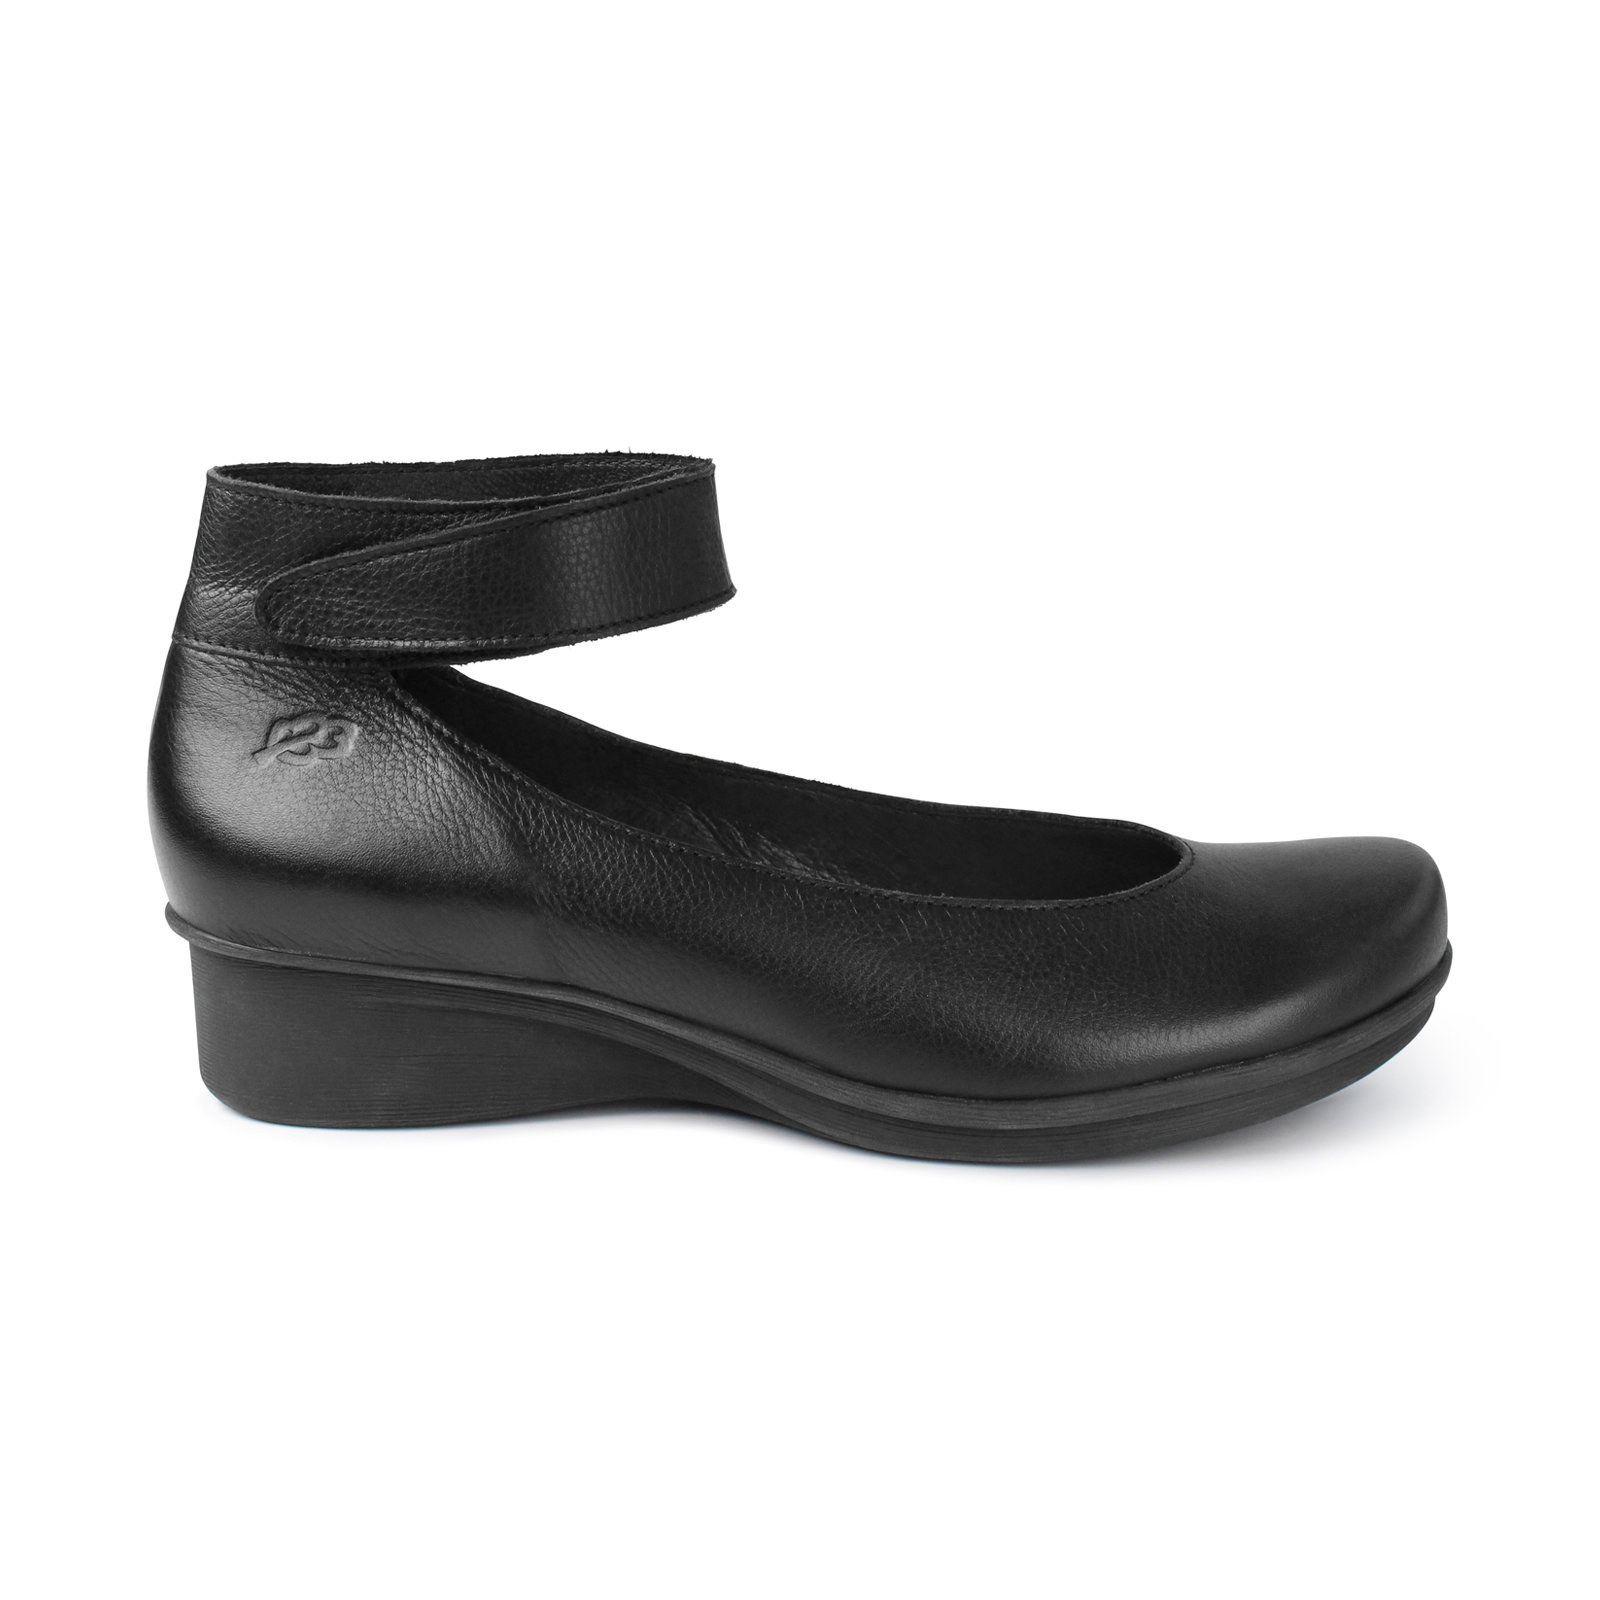 Sydney Shoe by Loints of Holland (Leather Shoe) Artful Home